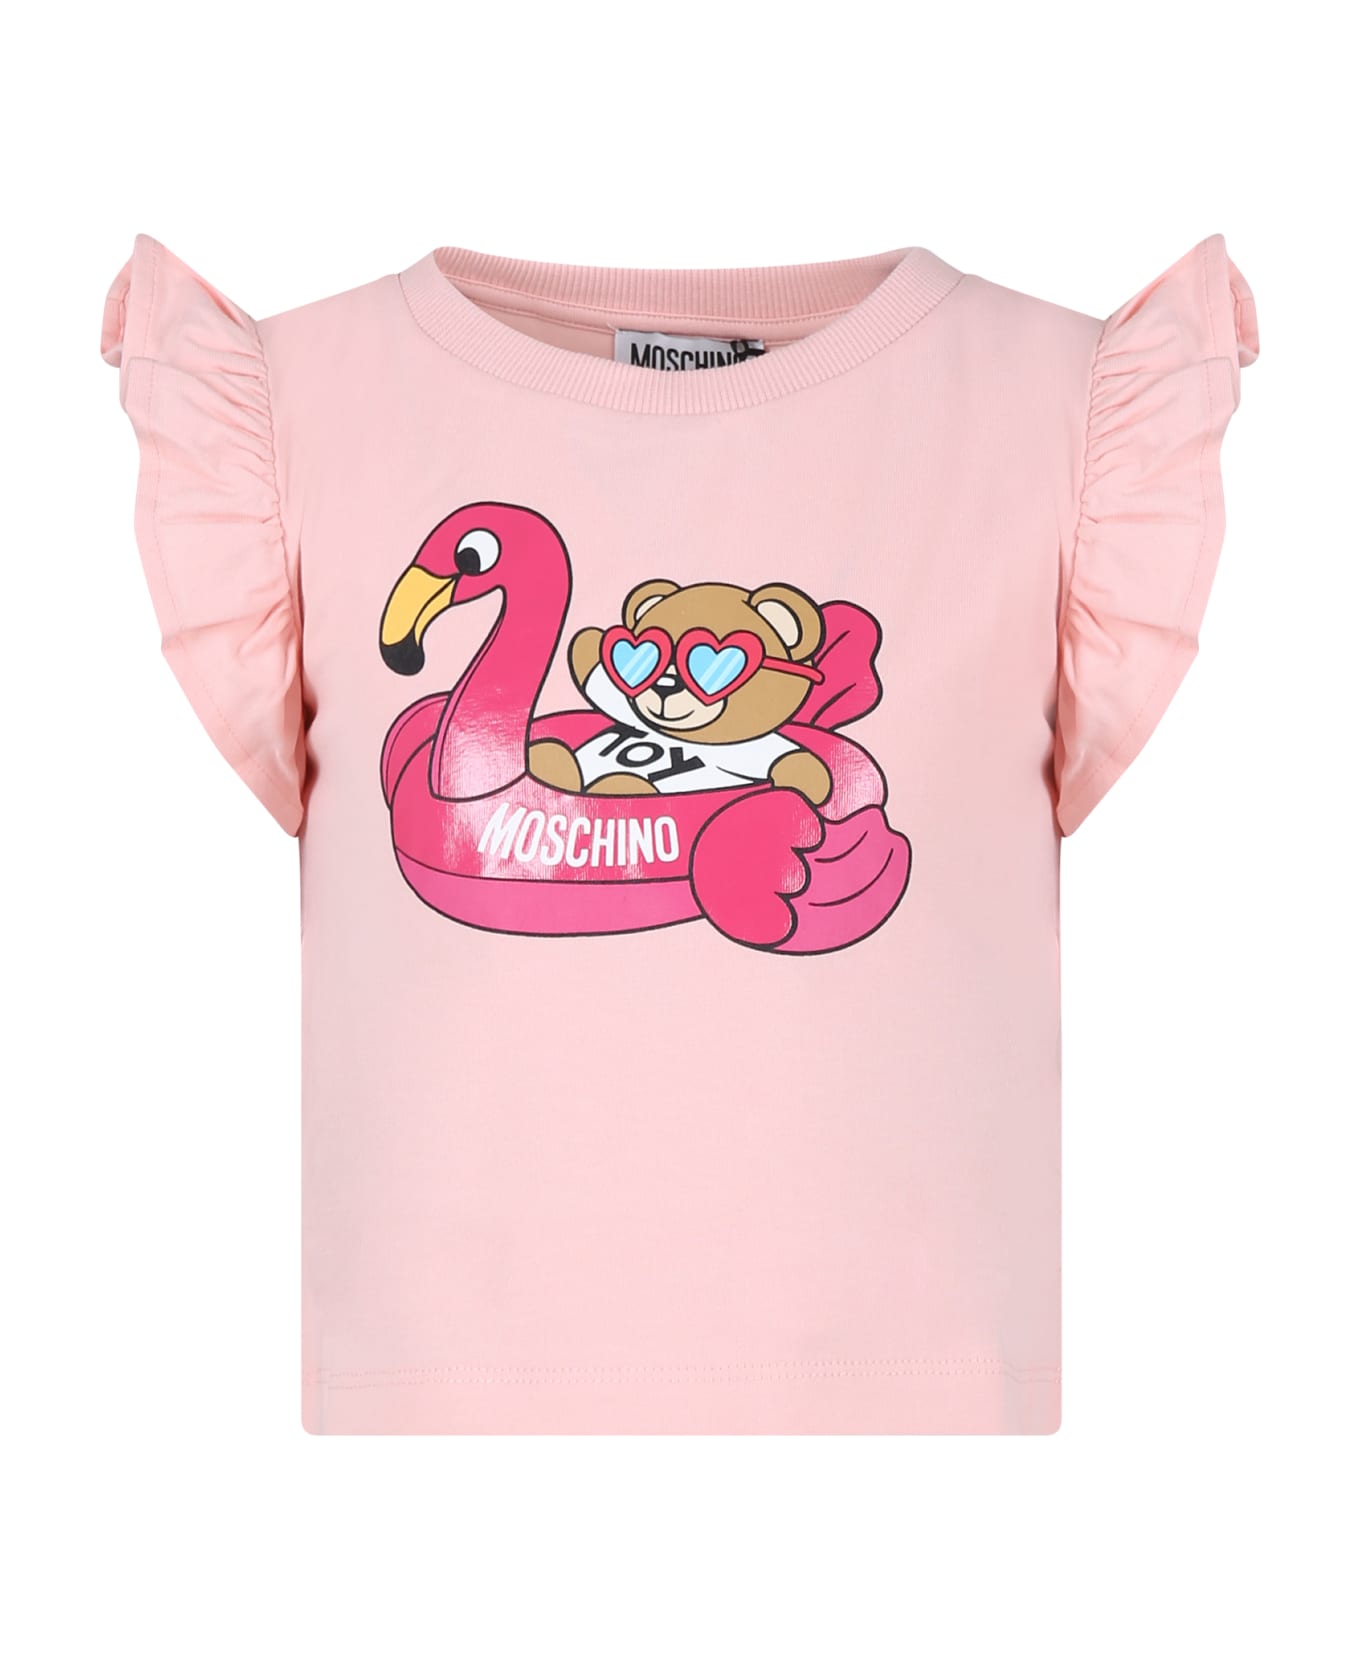 Moschino Pink T-shirt For Girl With Teddy Bear And Flamingo - Pink